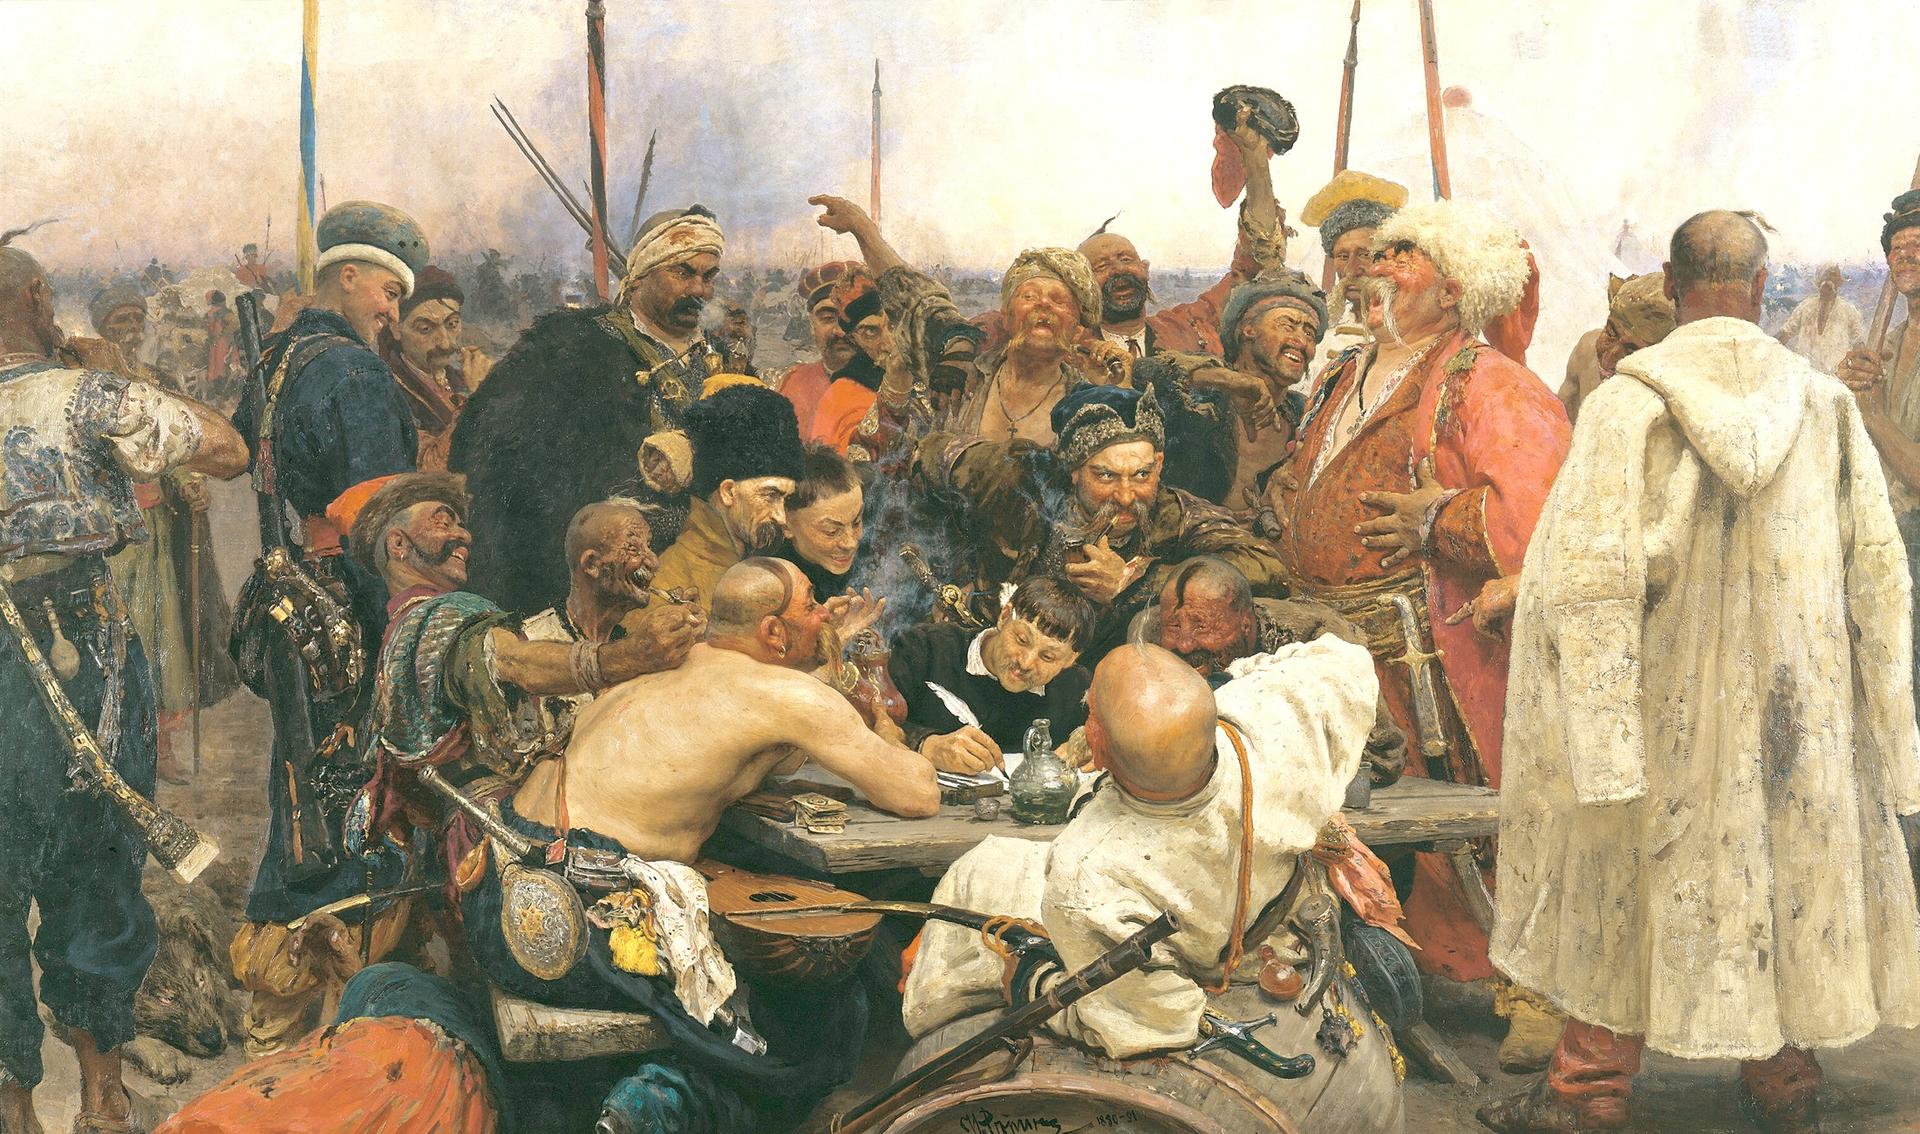 Early Ukrainian diplomacy. The Zaporozhian Cossacks reply to the Sultan of Turkey, by 19th century Russian artist, Ilya Repin. Ukraine has always been vulnerable to more powerful neighbors.   